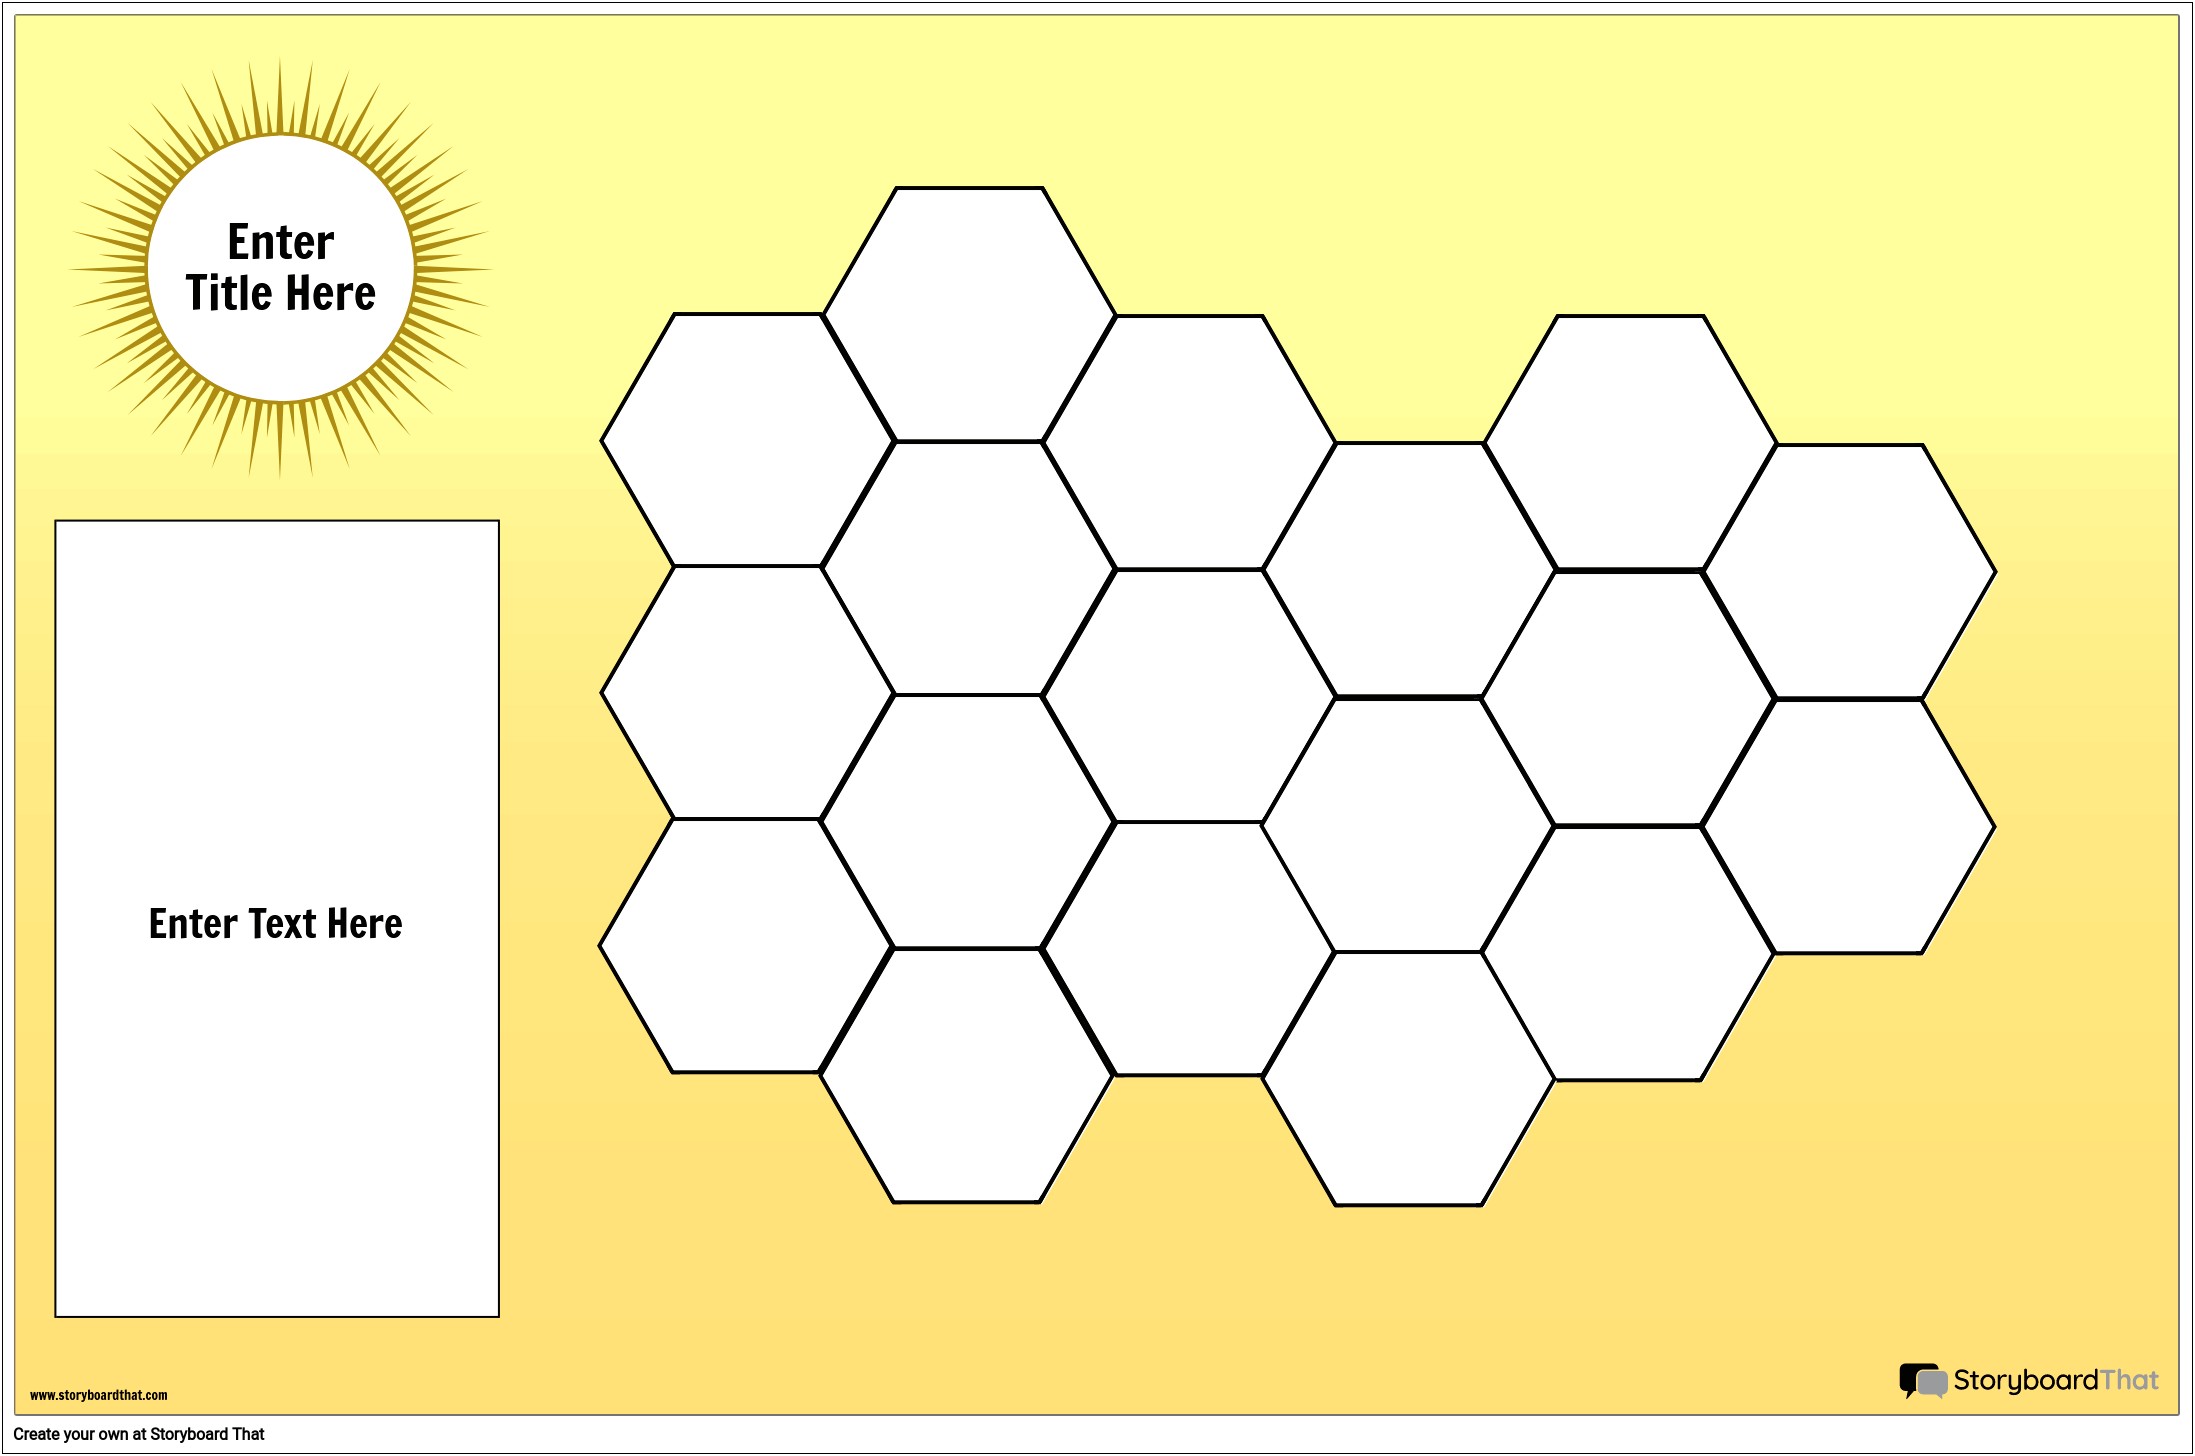 Free Blank Game Board Templates For Teachers